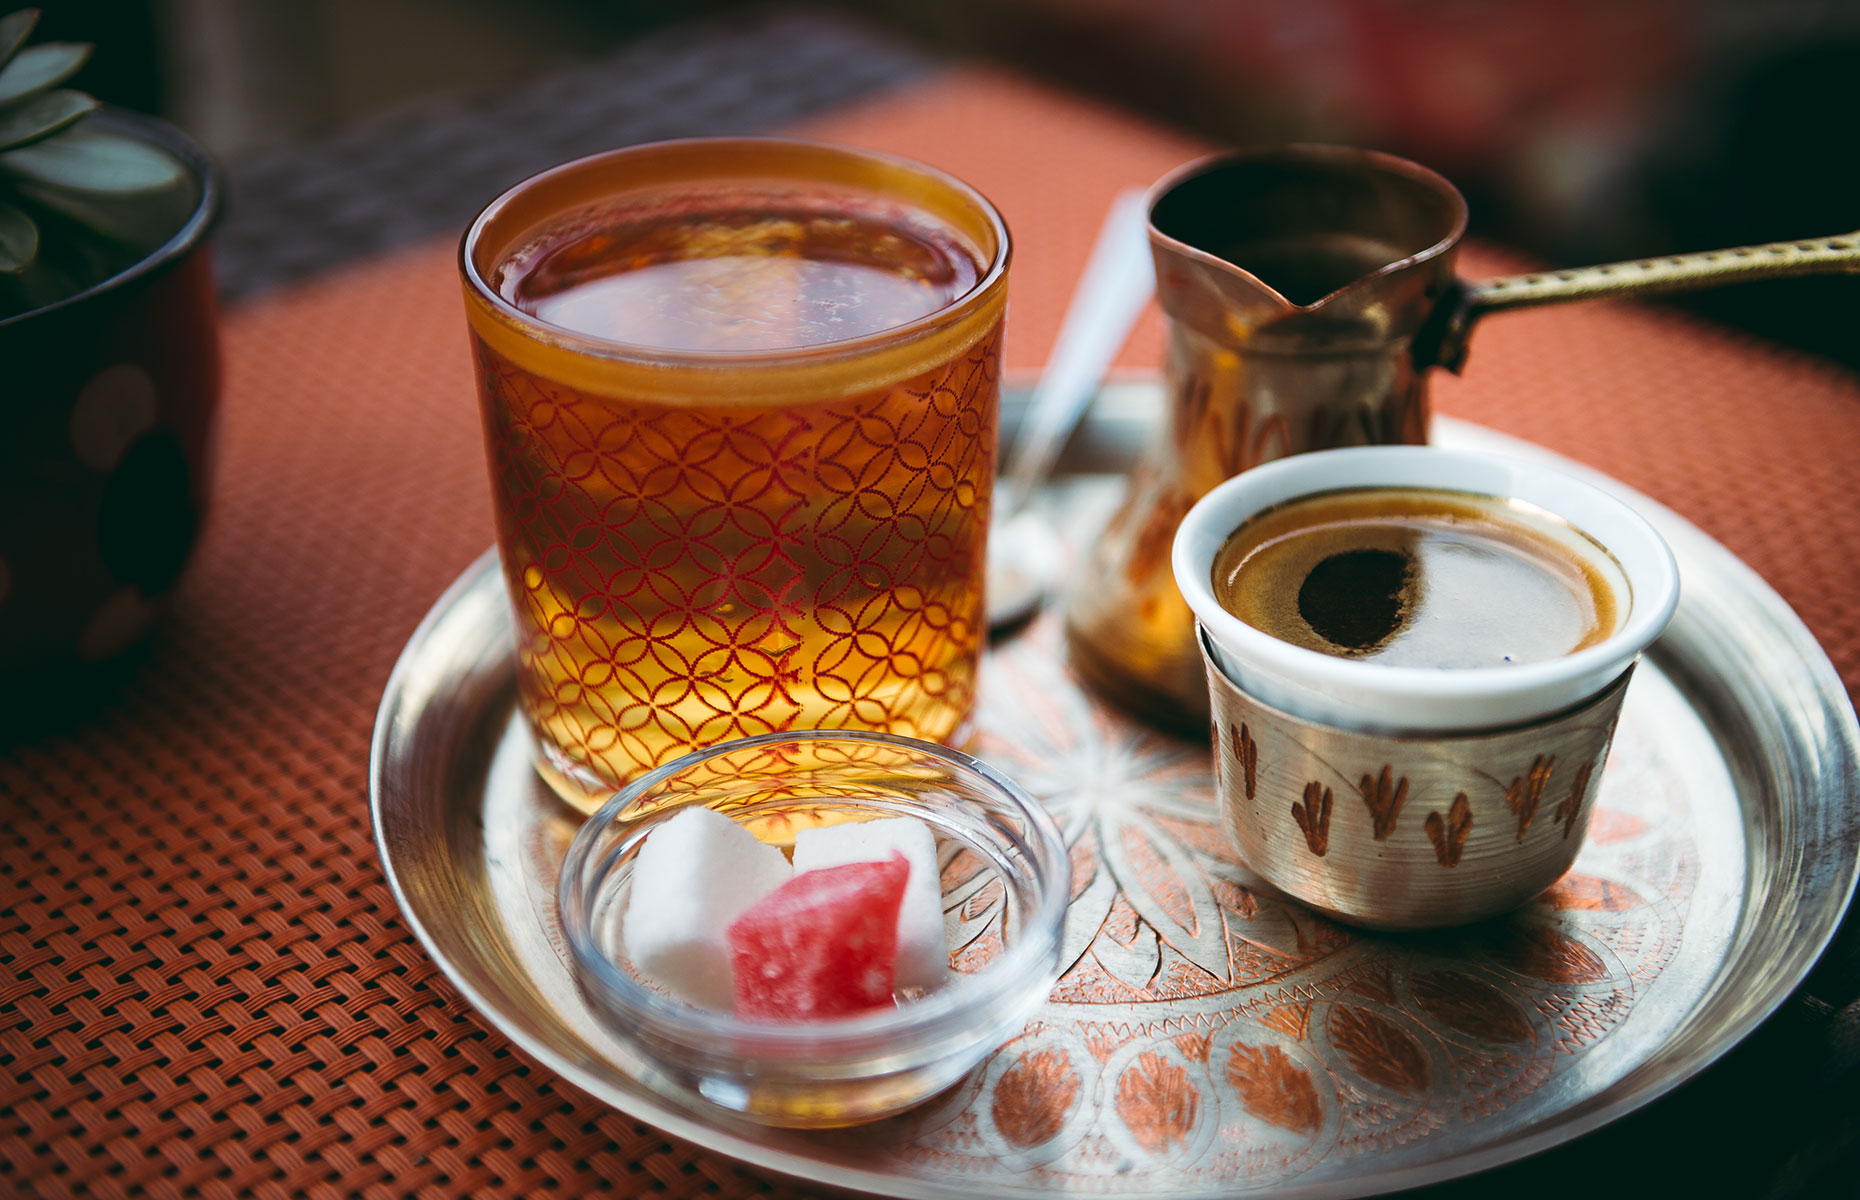 Traditional Bosnian coffee (Image: Lifeinviewfinder/Shutterstock)